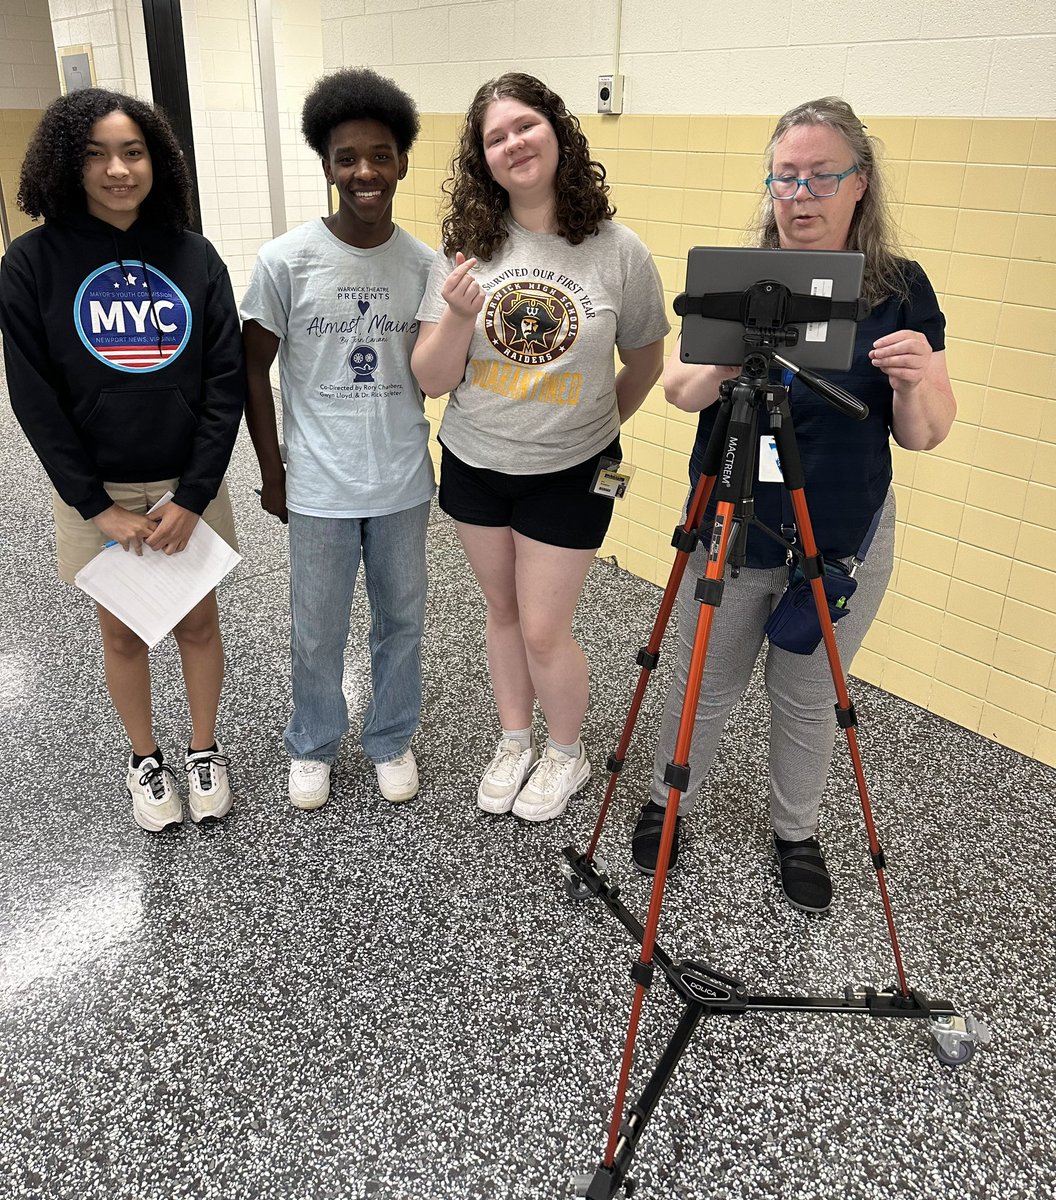 I’m enjoying collaborating with our ITC @CMarcolini1 & @BTWashingtonMS AP @Adkinson_NBCT on an exciting rising 9th grade transition activity. Zooming LIVE all week from @WarwickRaiders & stay tuned for the “Welcome to Warwick” 🎥 coming soon! @PrincipalKAM